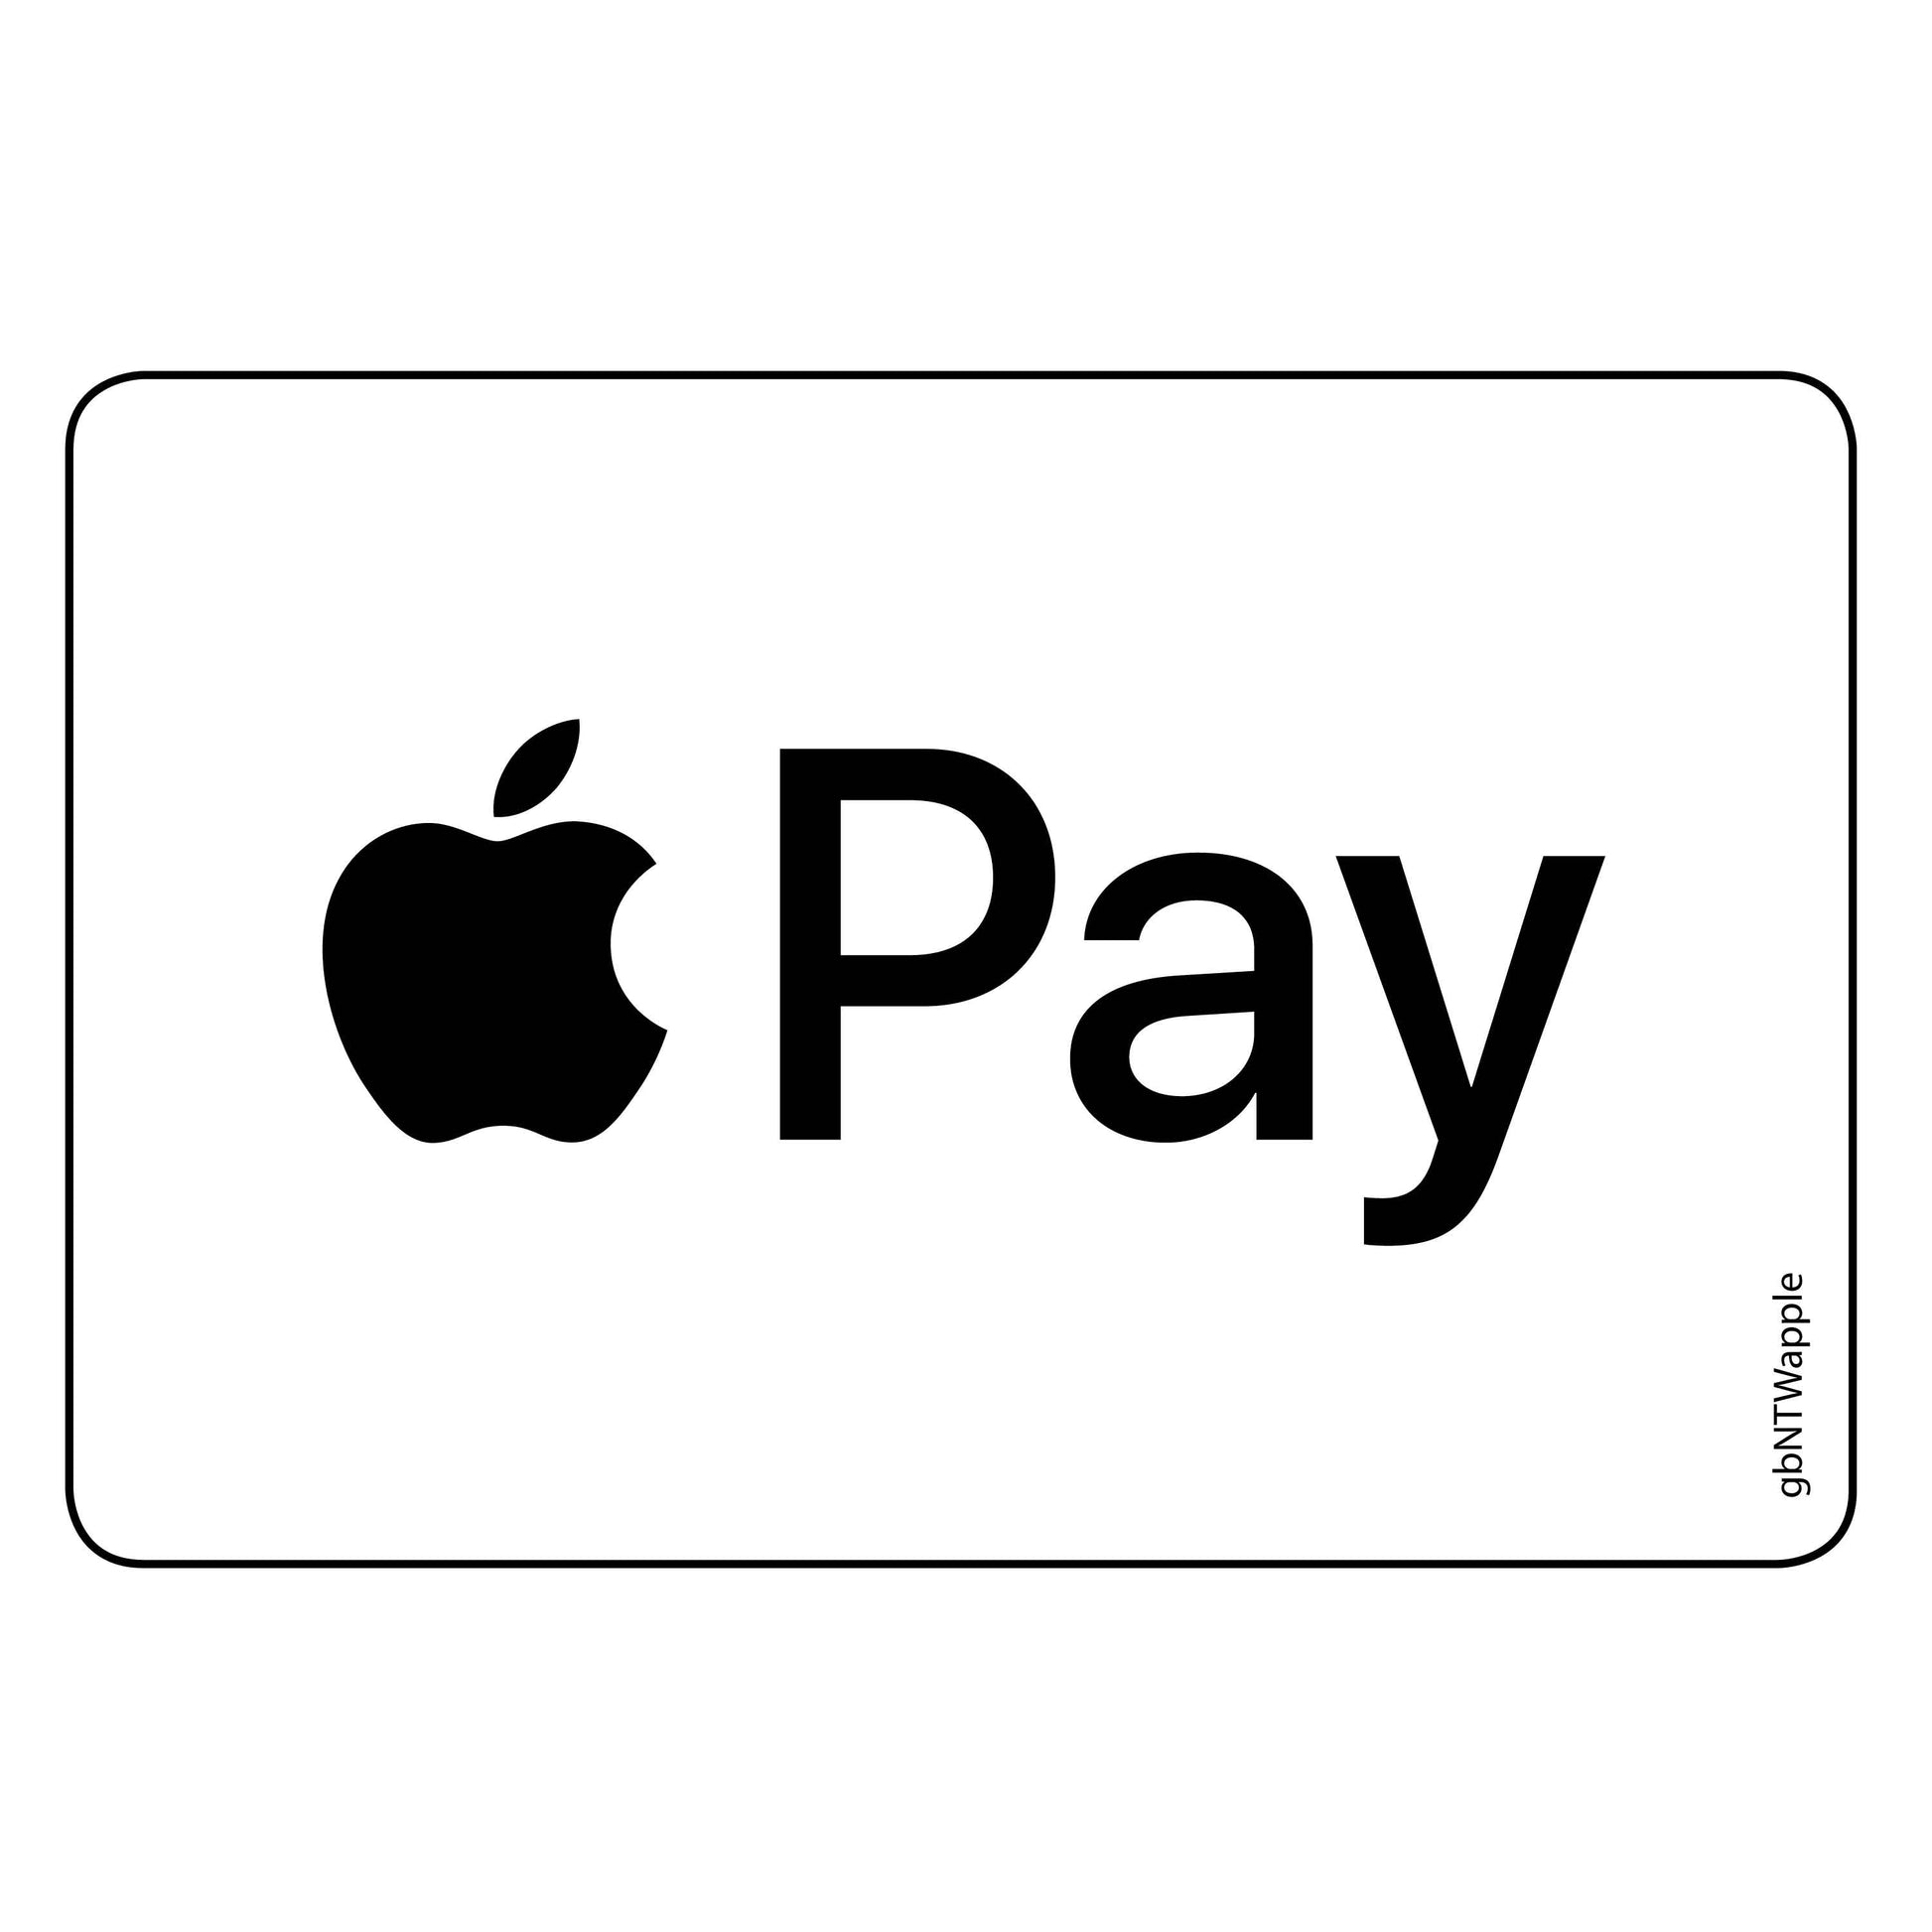 Single Network Decal, Apple Pay Decal. 3 inches by 2 inches in size.